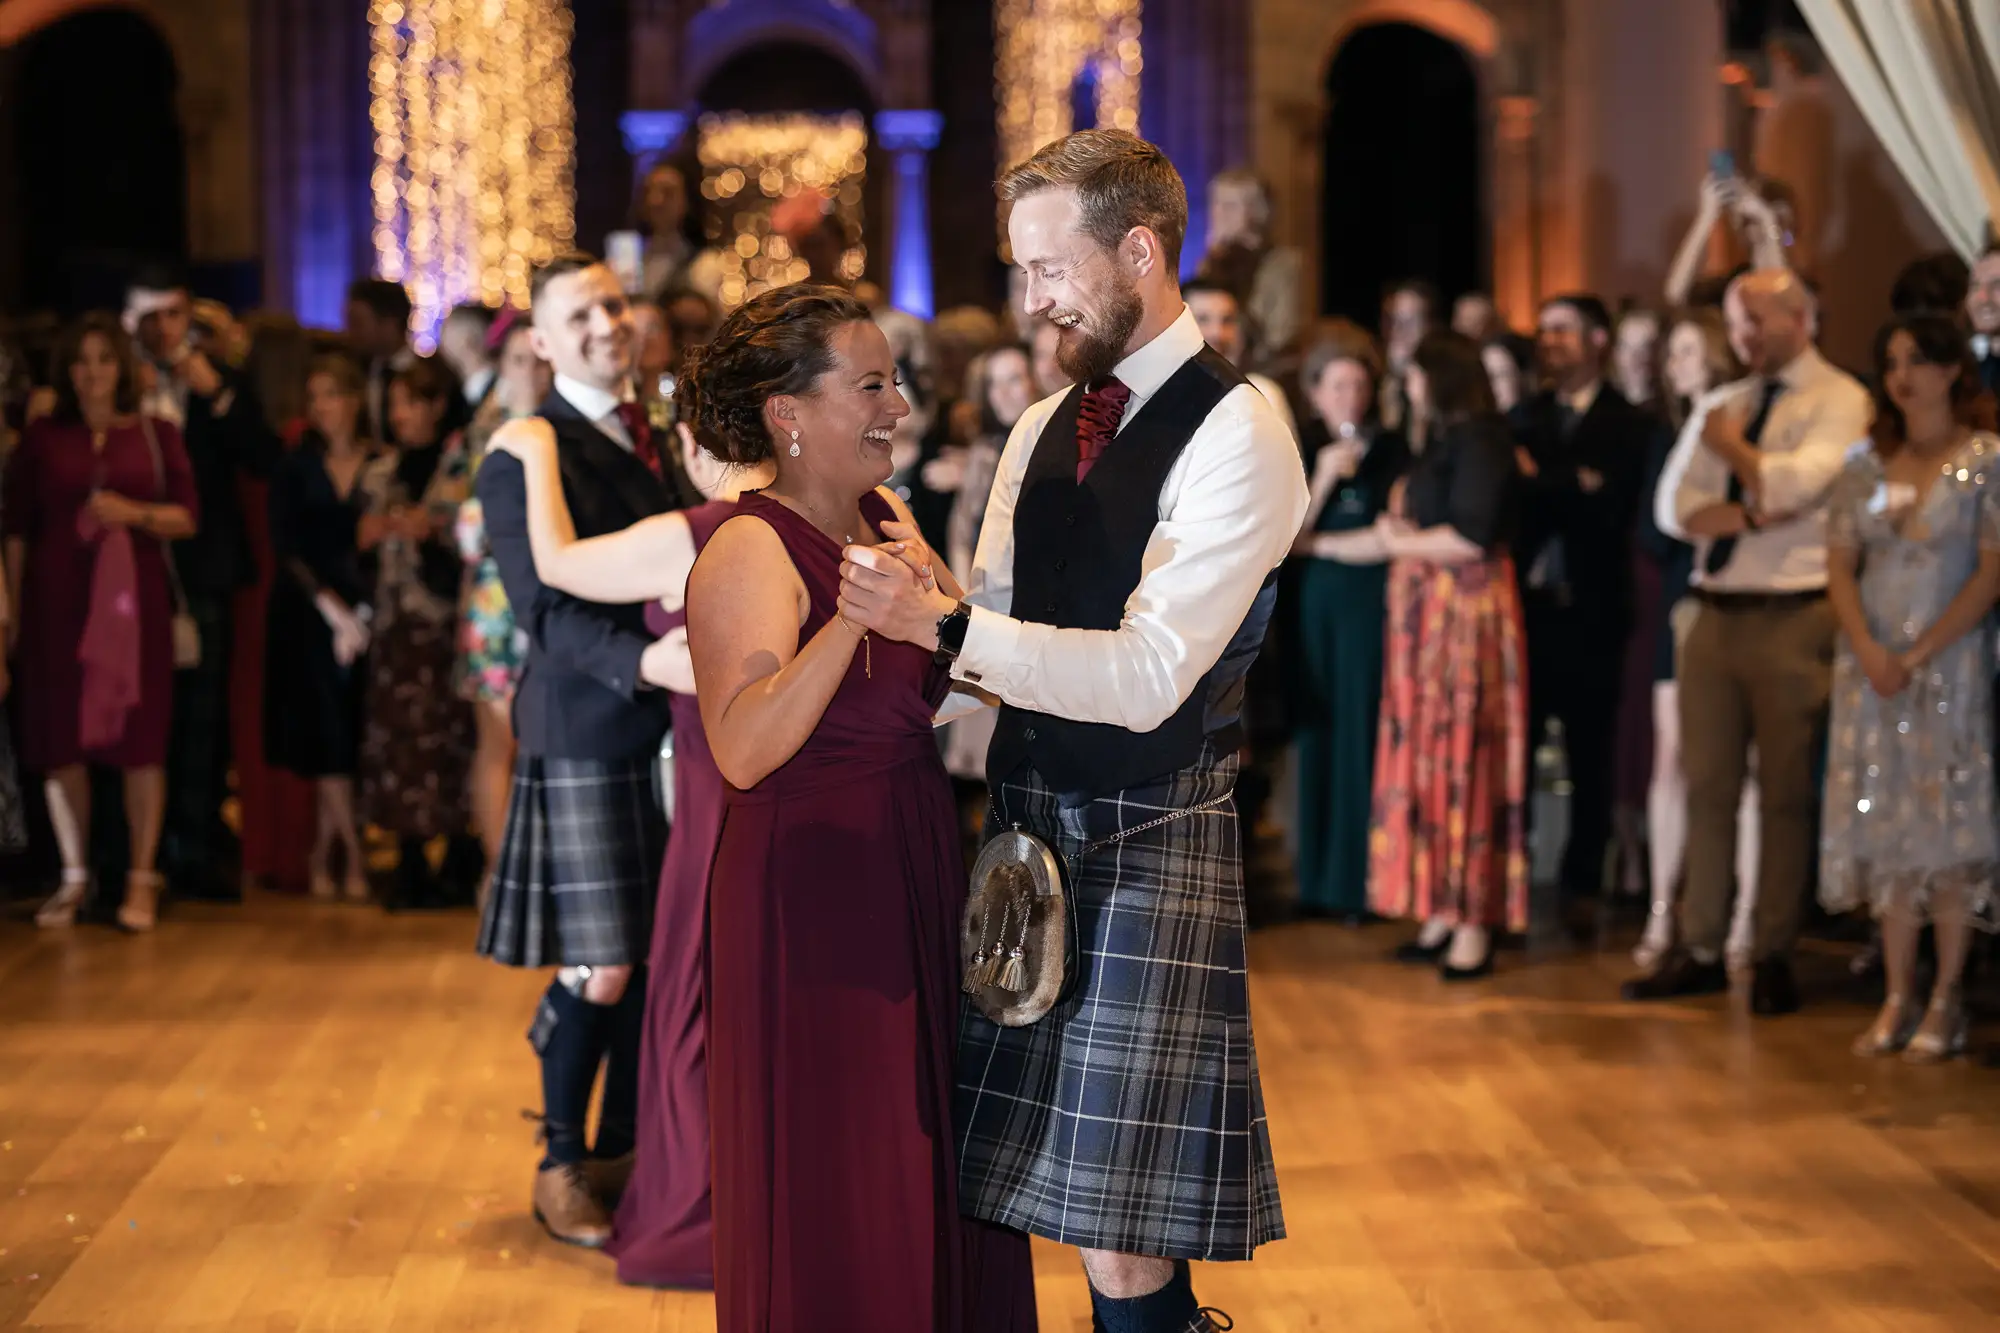 A man in a kilt and a woman in a burgundy dress share a dance at a formal event, surrounded by onlookers in a well-lit, ornate ballroom.